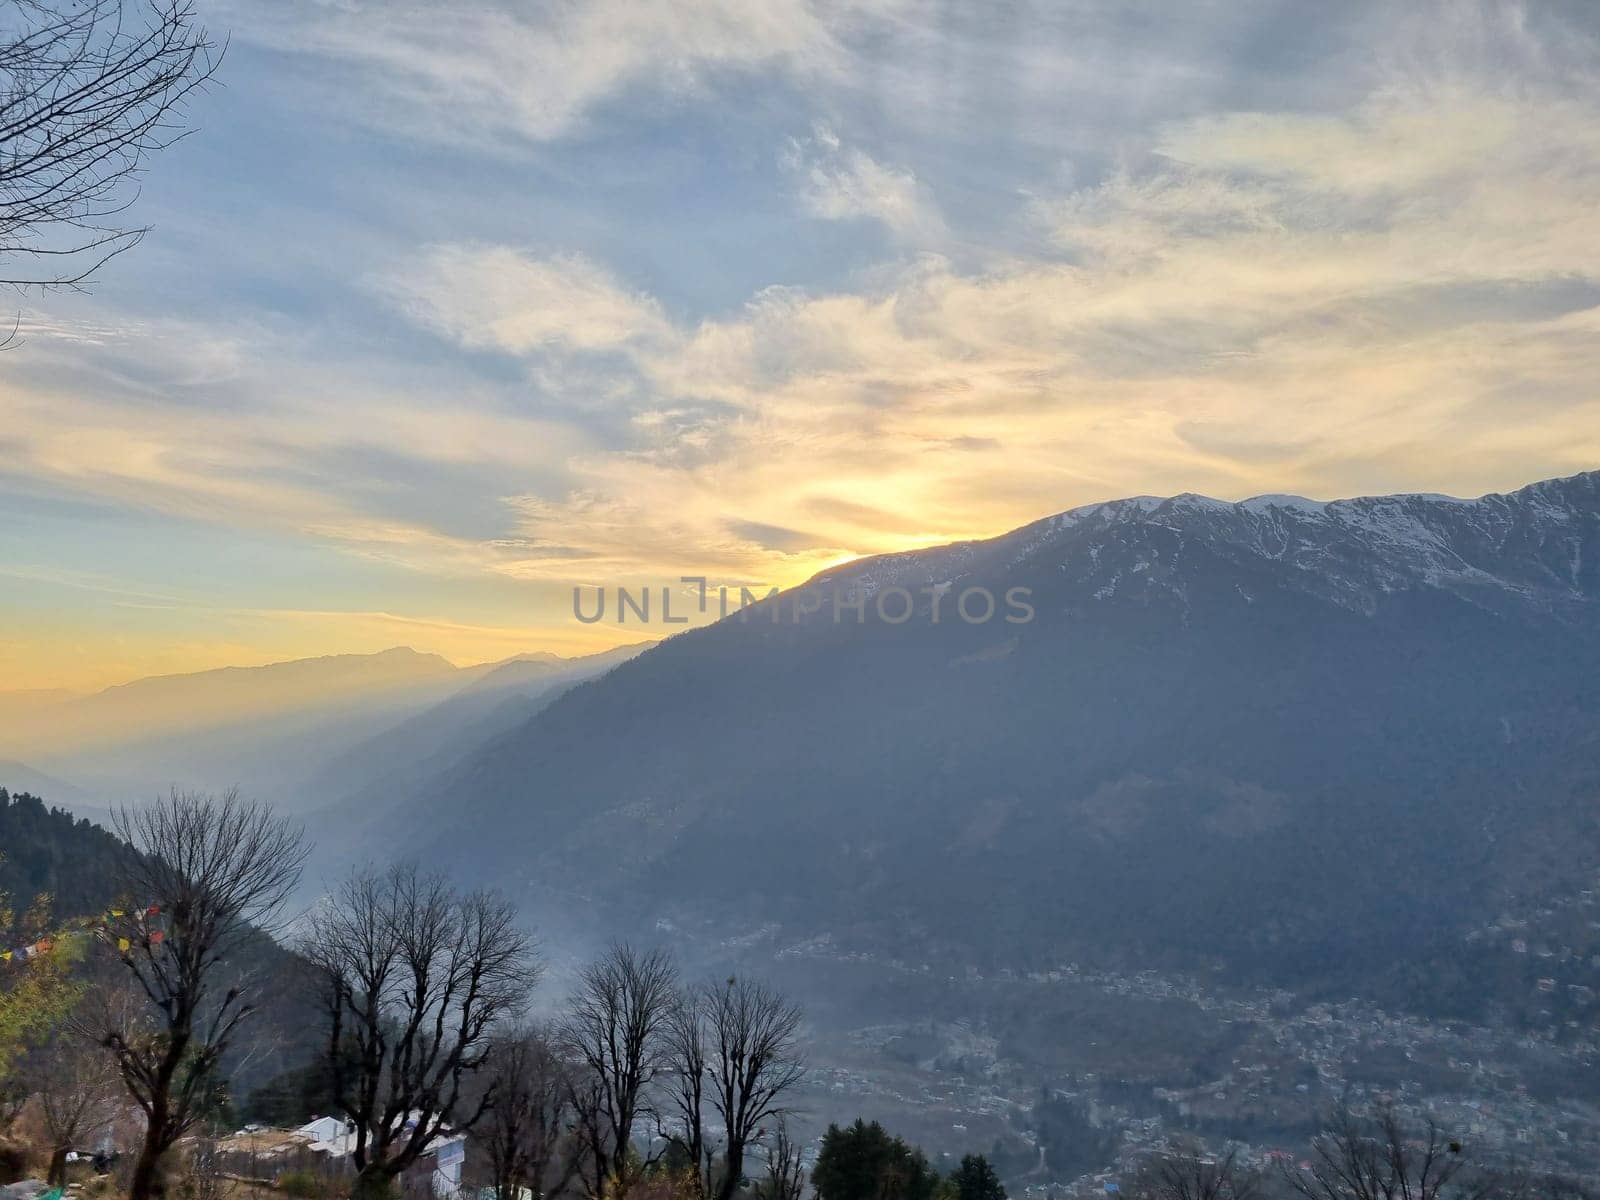 Sunrise over the himalaya mountains with manali kullu valley and clouds with trees in foreground in India